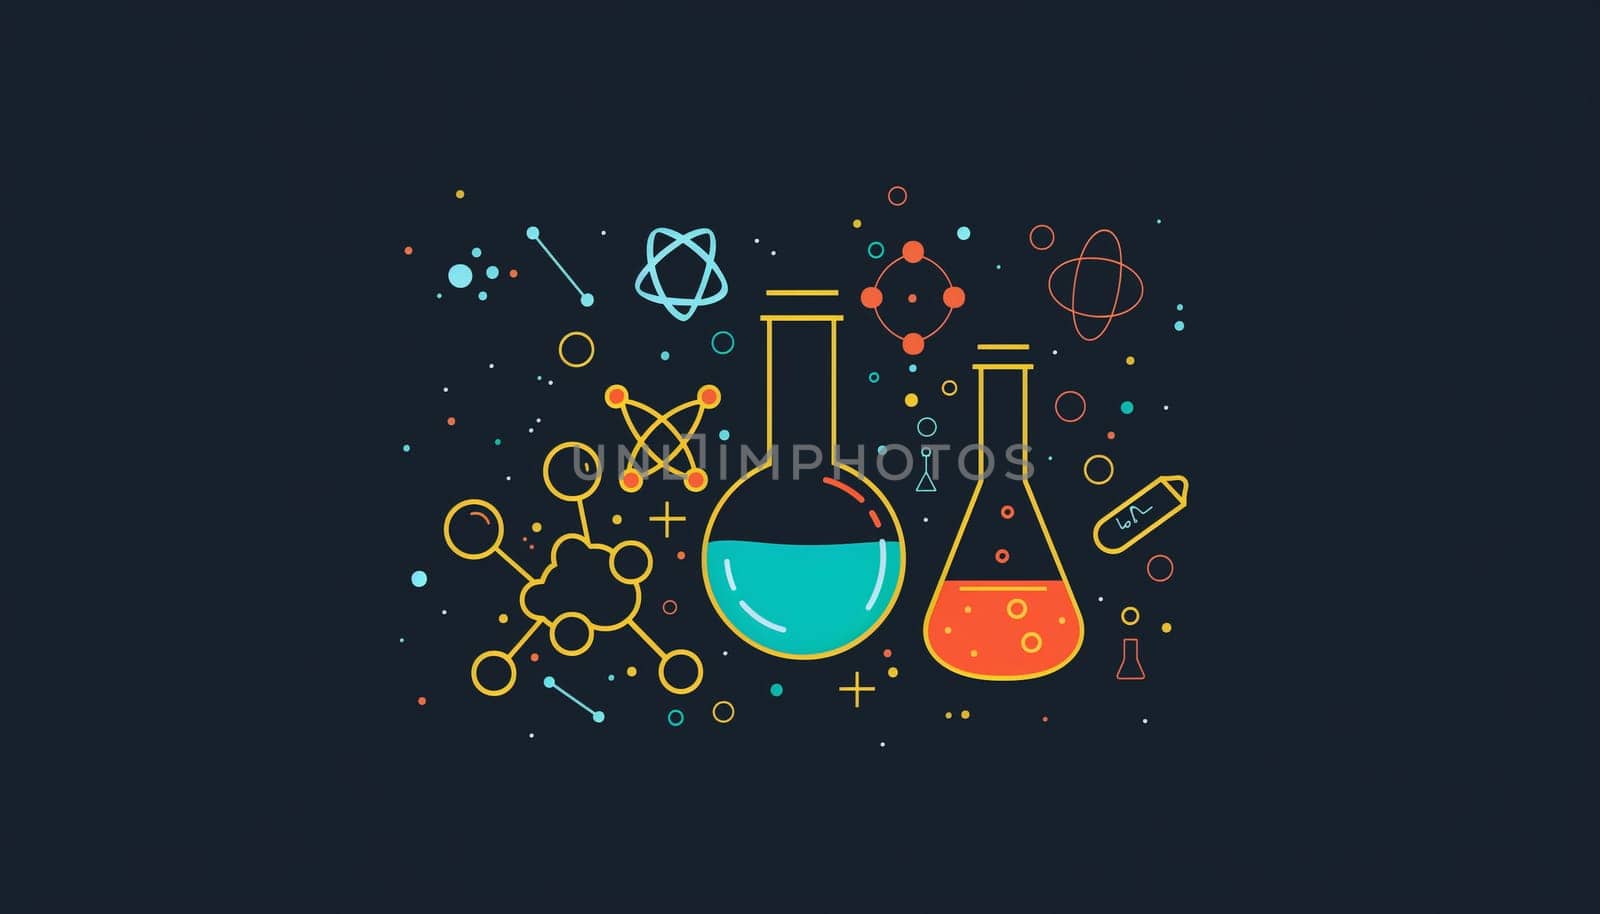 Professional and sophisticated graphics depicting scientific discoveries and achievements in the field of science and medicine